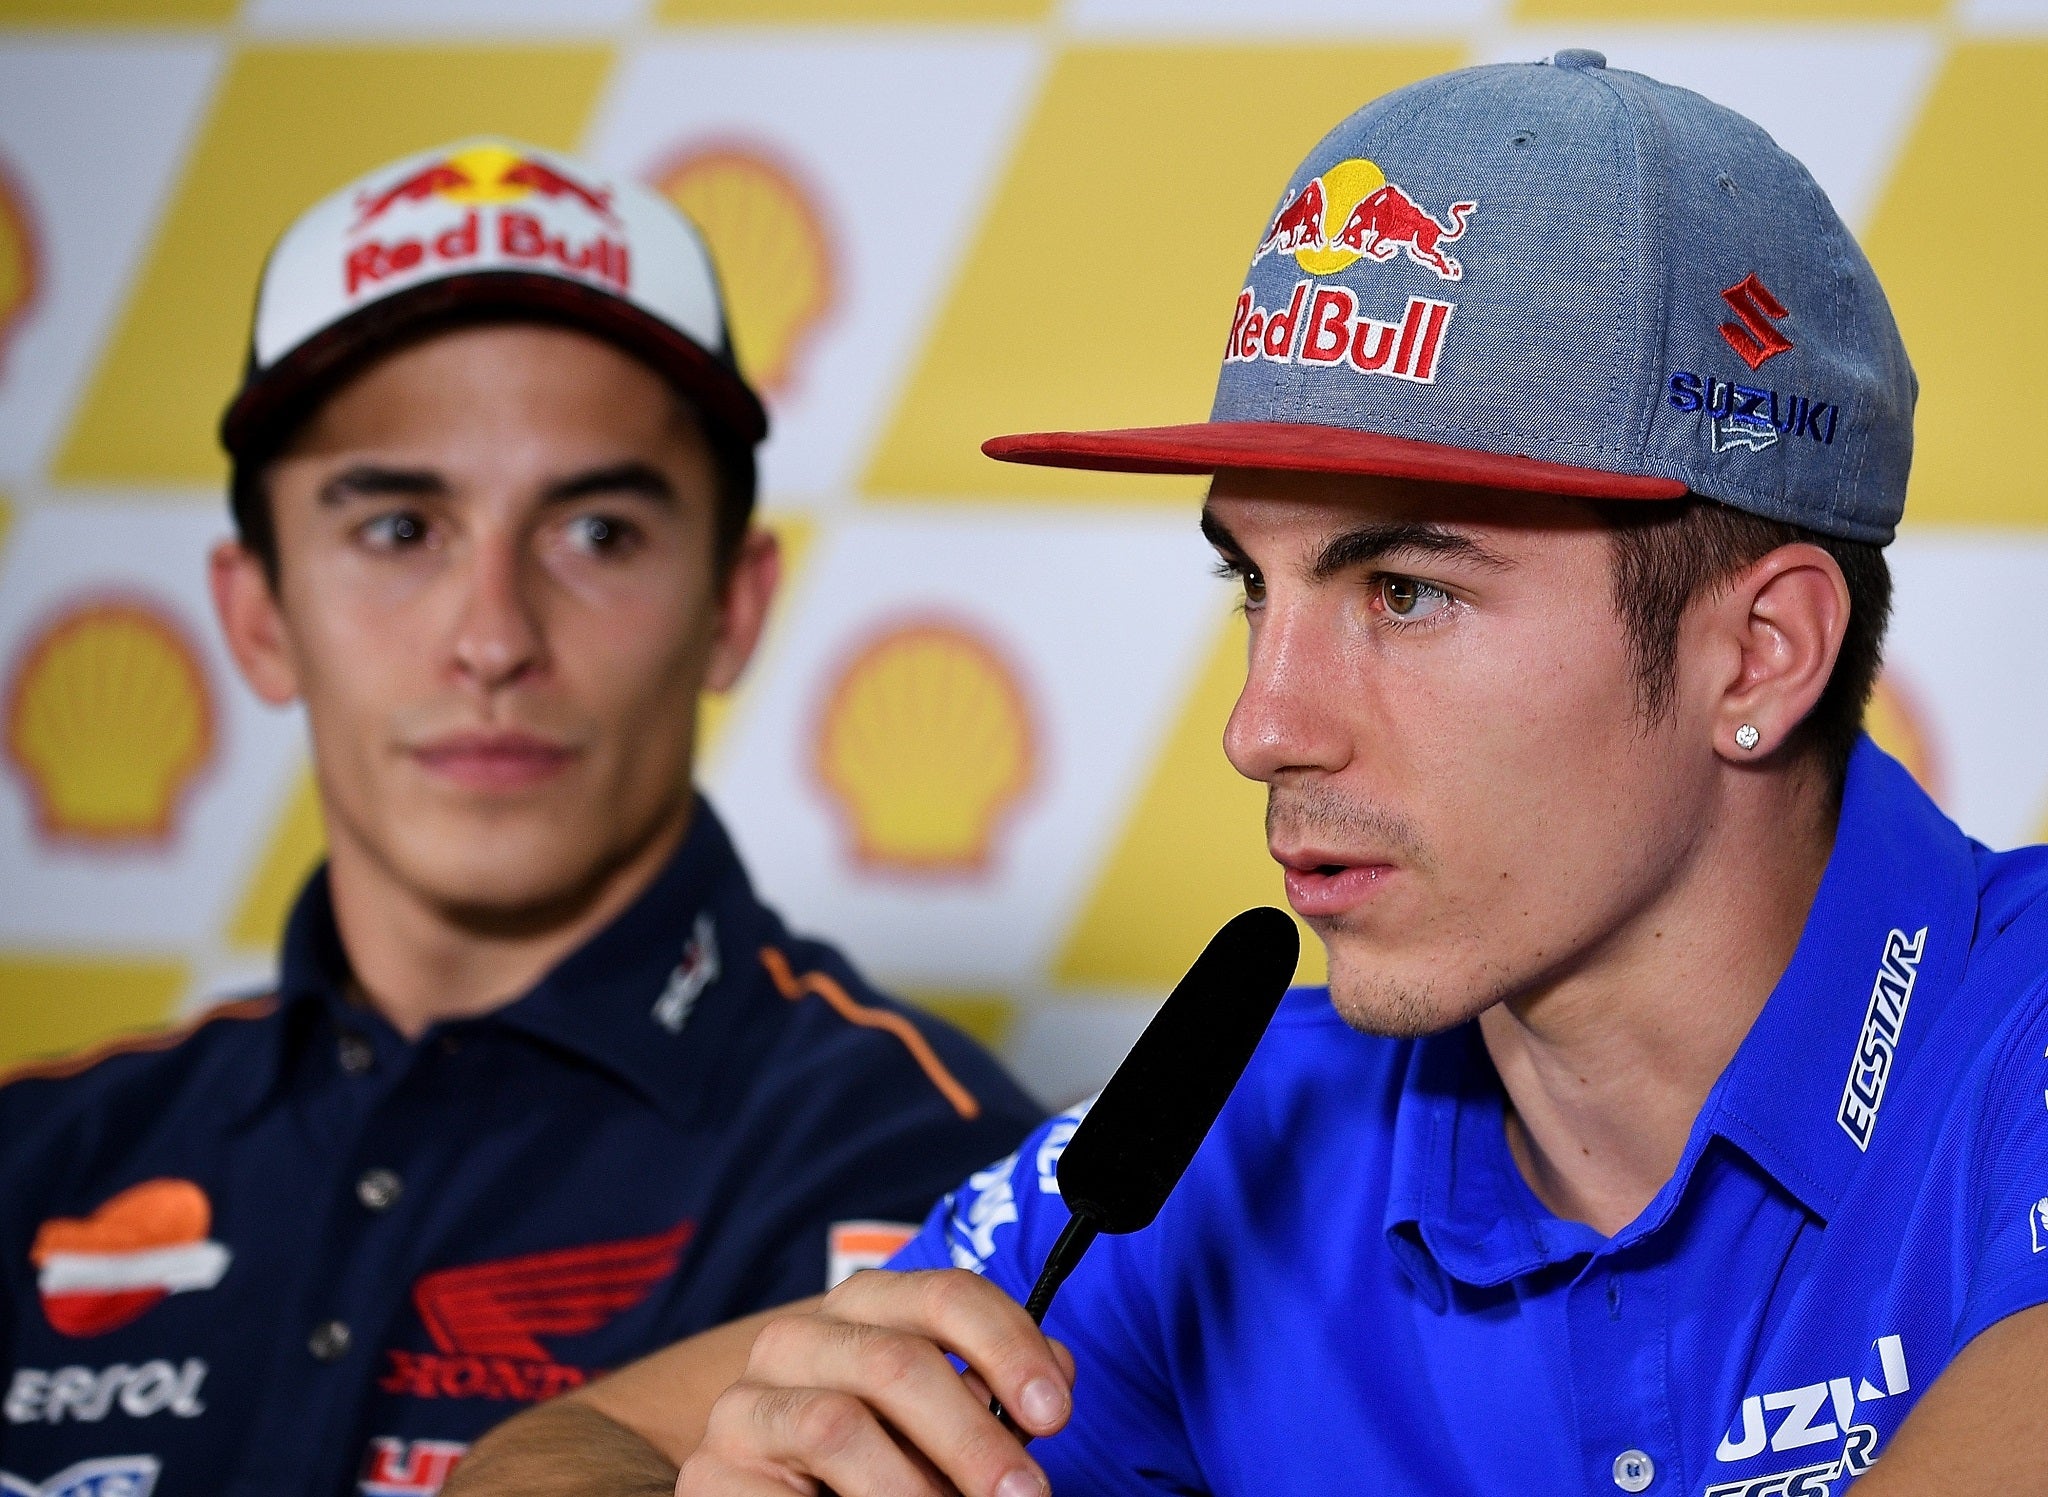 Marquez believes Maverick Vinales will be a threat for the world title in 2017